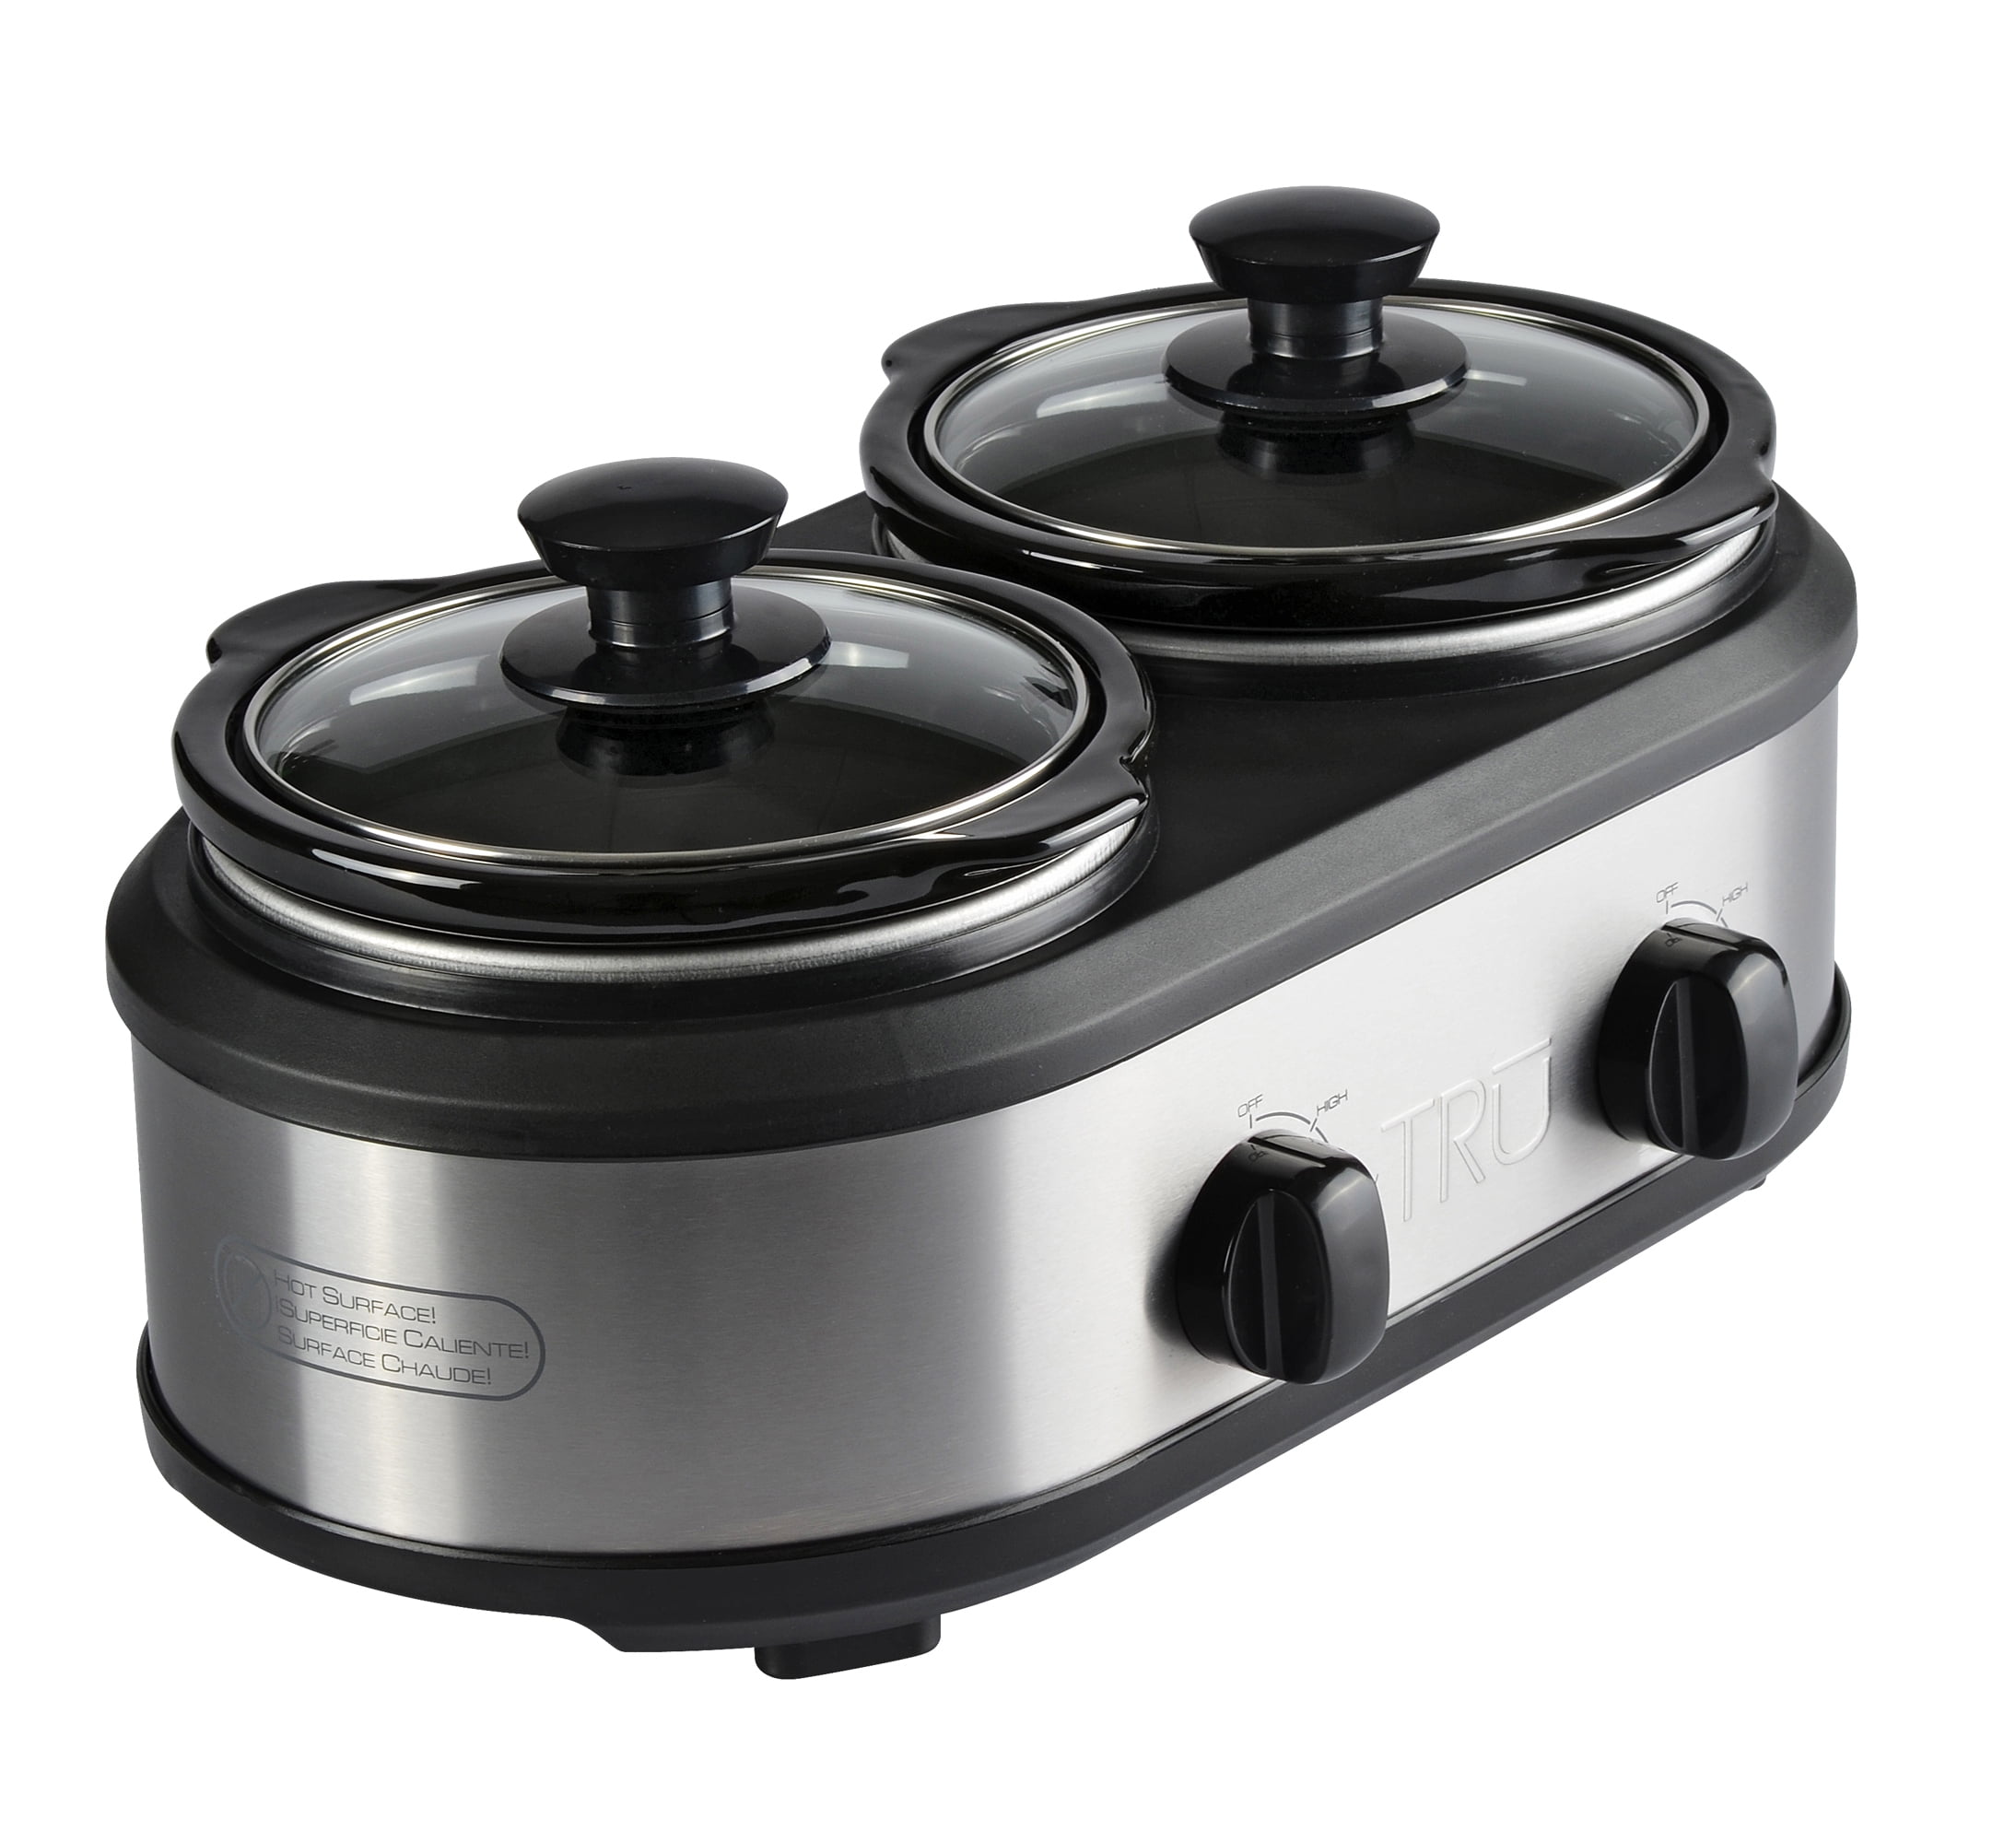 TRU Triple Slow Cooker with 3 Separate 2½ Quart Inserts